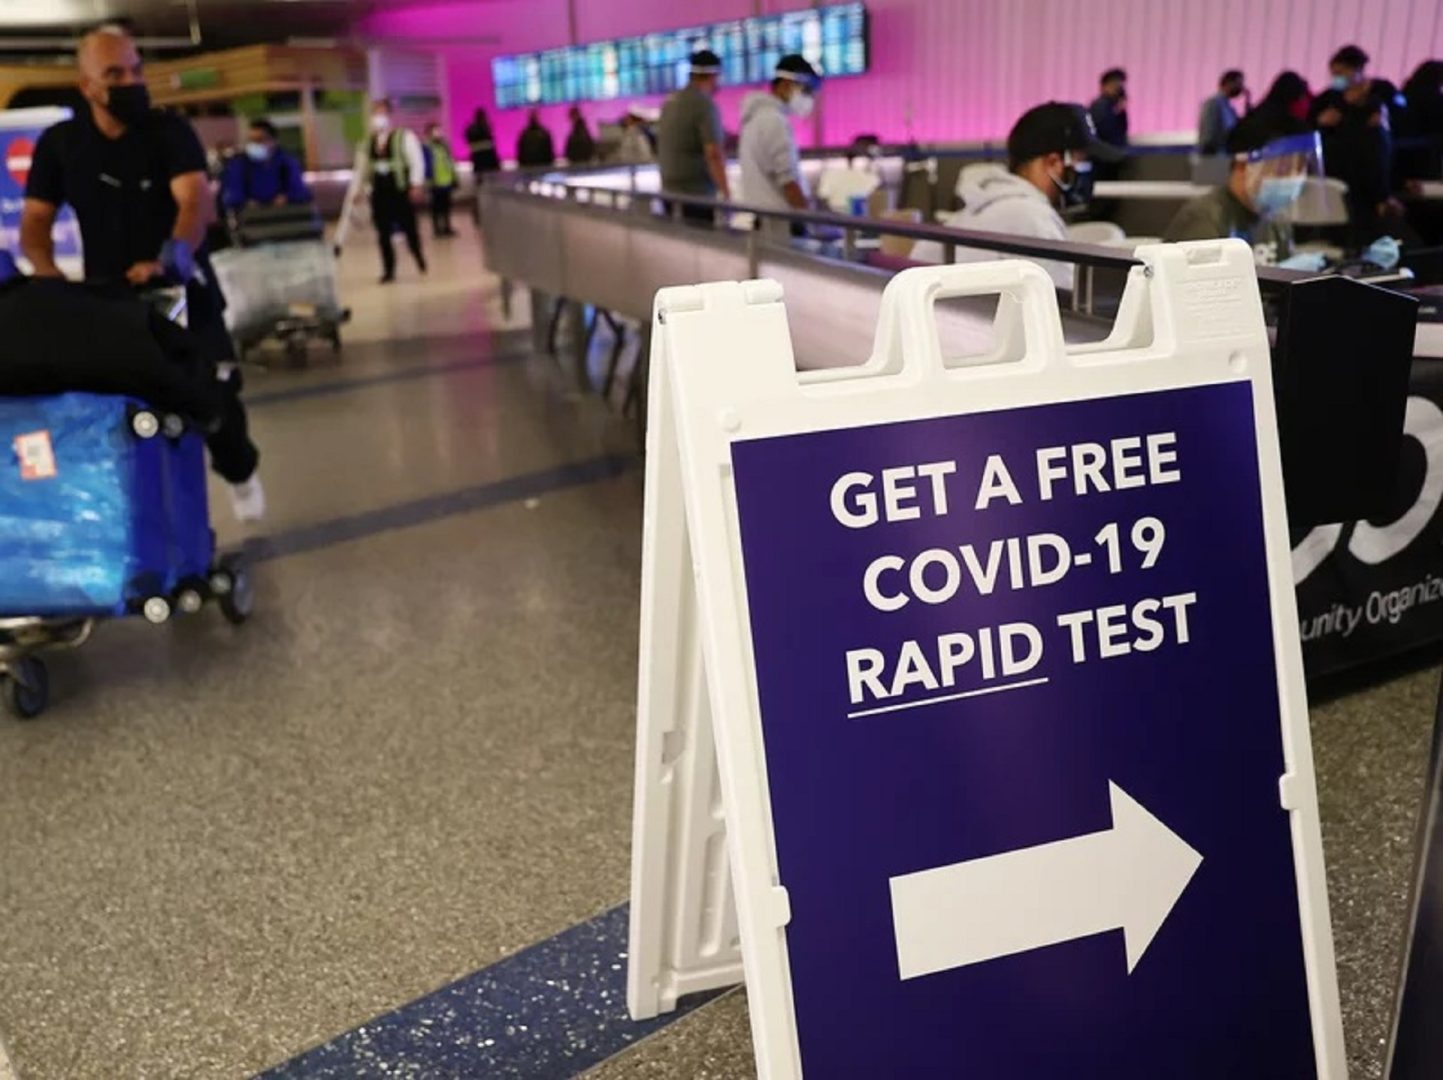 An international passenger arrives near a new rapid COVID-19 testing site for arriving international passengers at Los Angeles International Airport (LAX) on Friday in Los Angeles.
